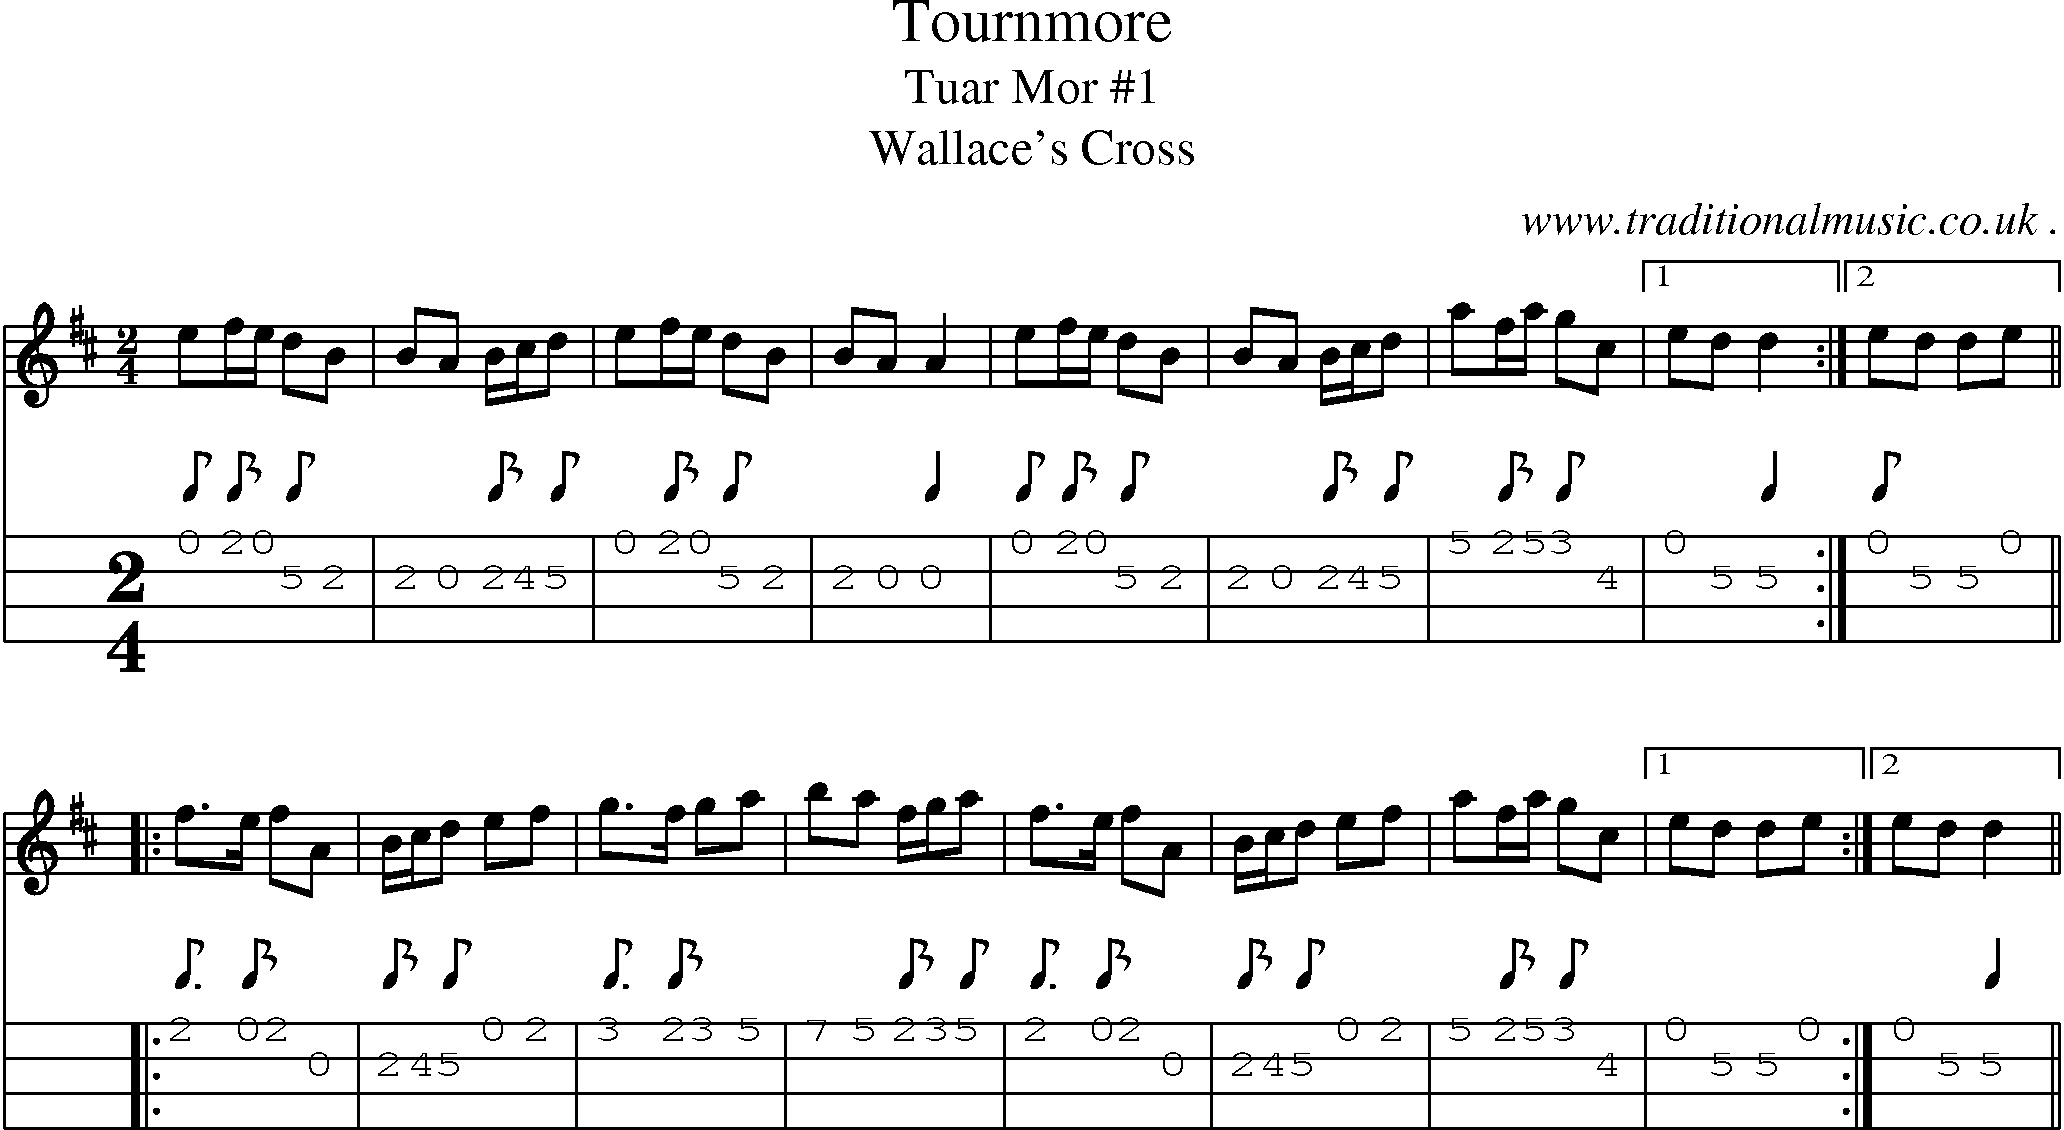 Sheet-Music and Mandolin Tabs for Tournmore